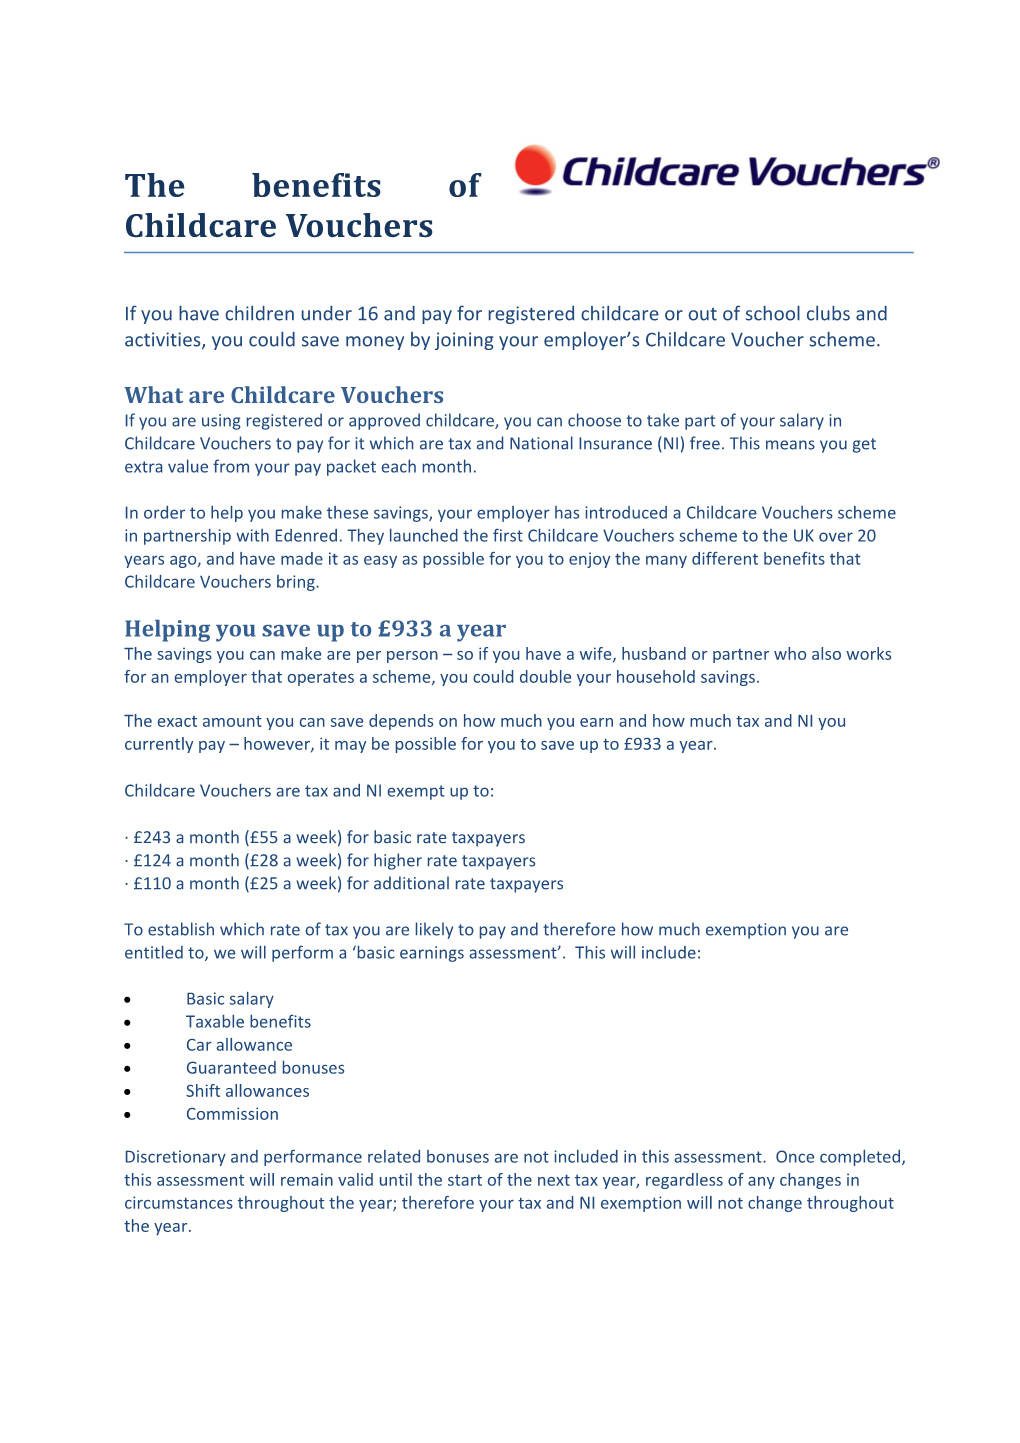 The Benefits of Childcare Vouchers